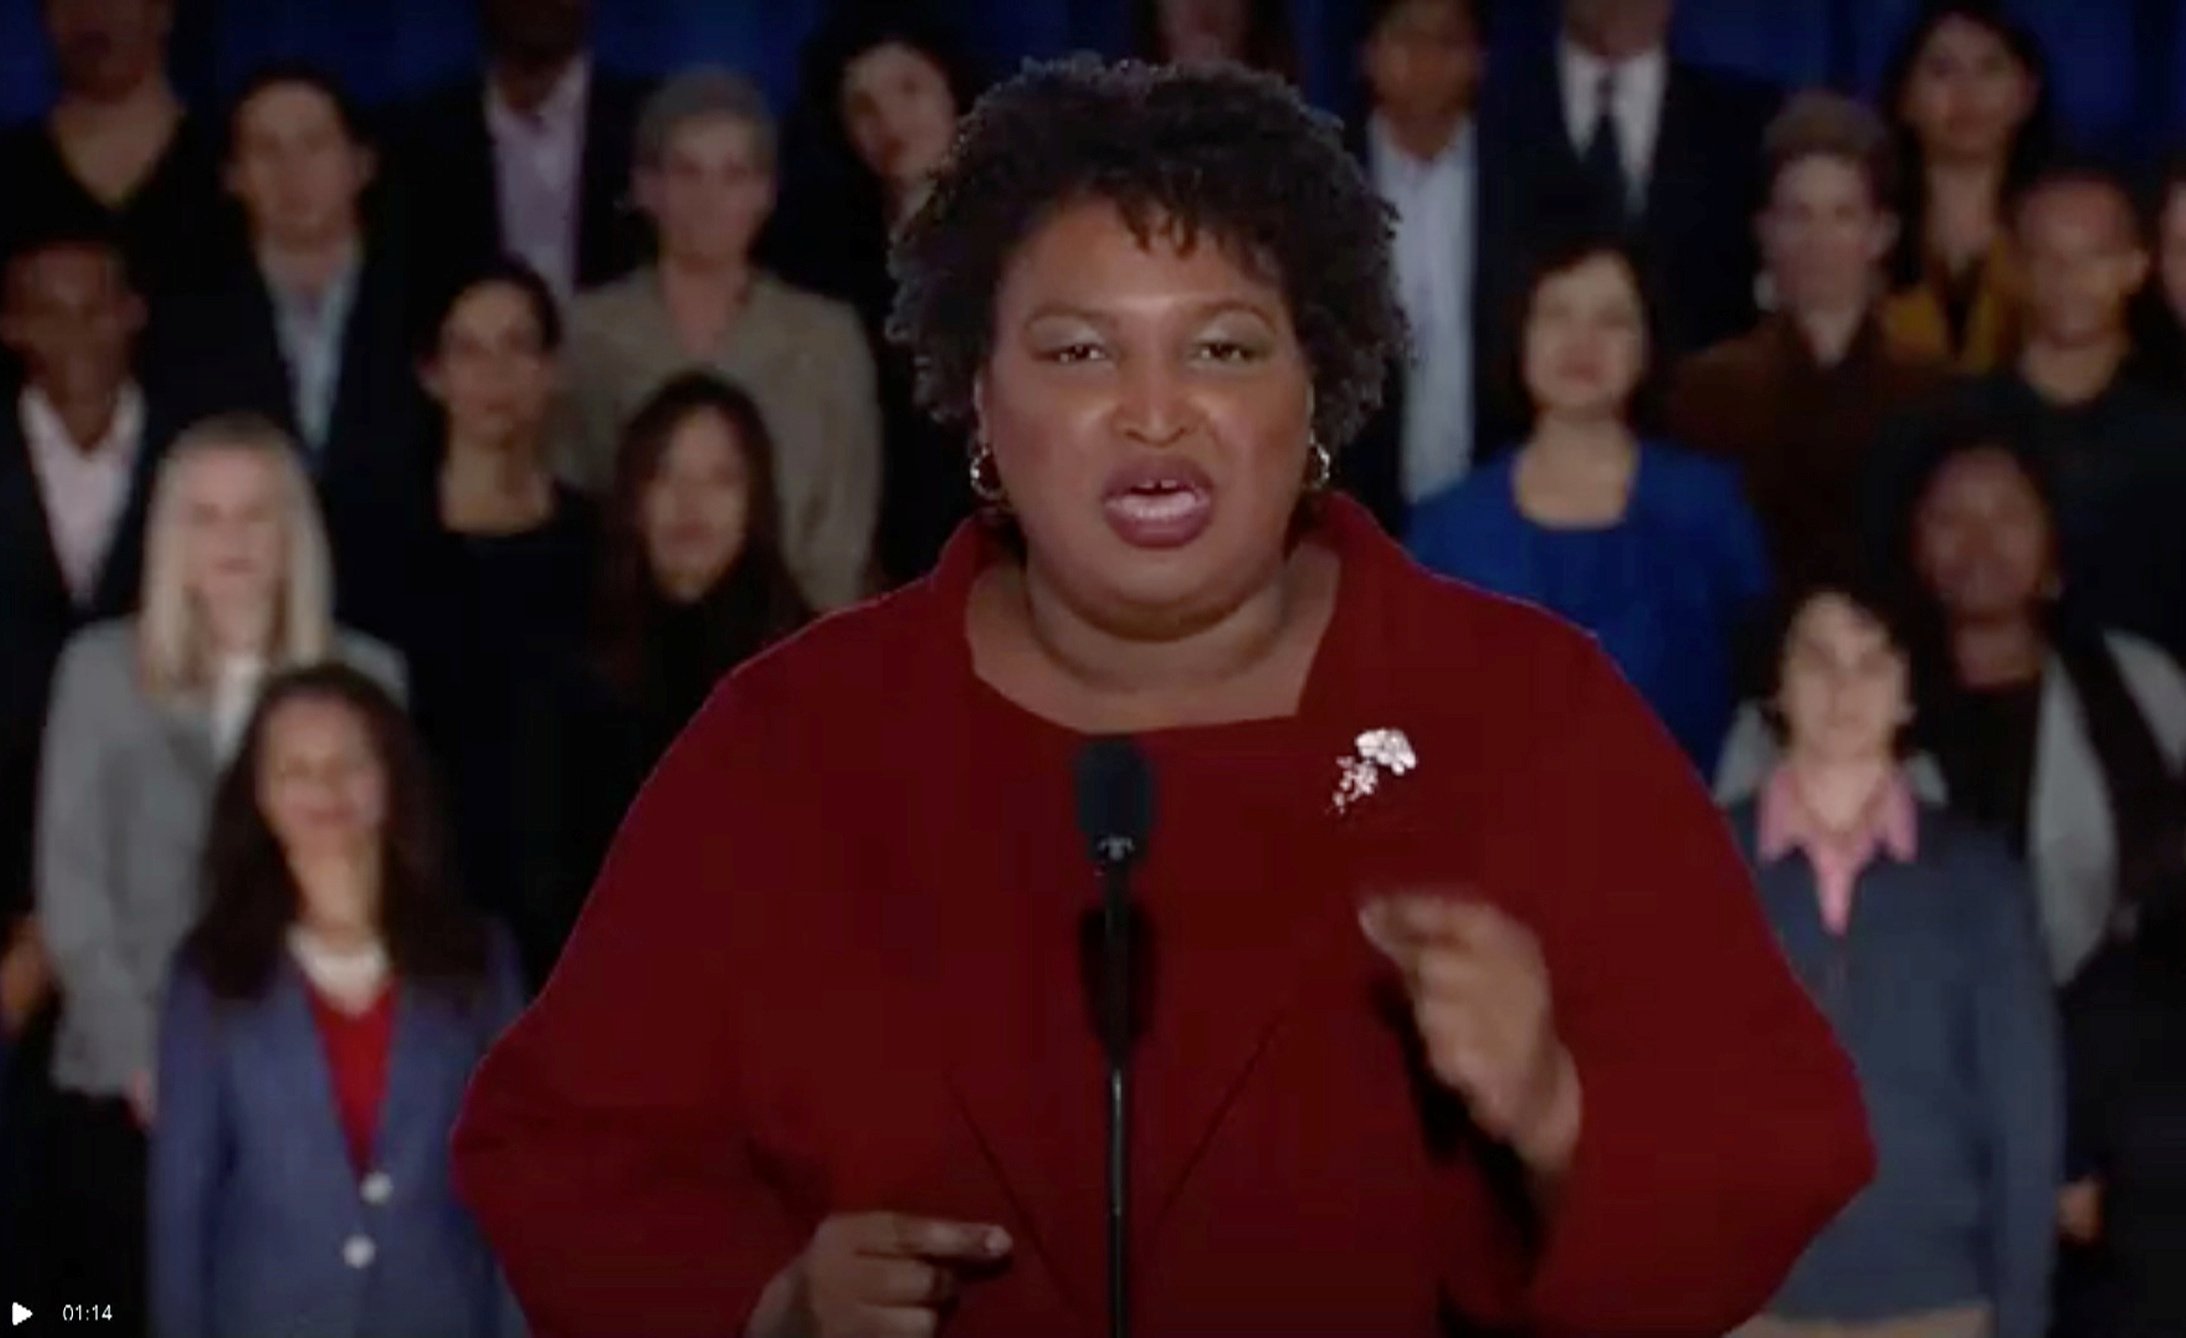 Former Georgia gubernatorial candidate Stacey Abrams delivers the Democratic response to the U.S. President Donald Trump's State of the Union address in this still frame taken from video, in Washington